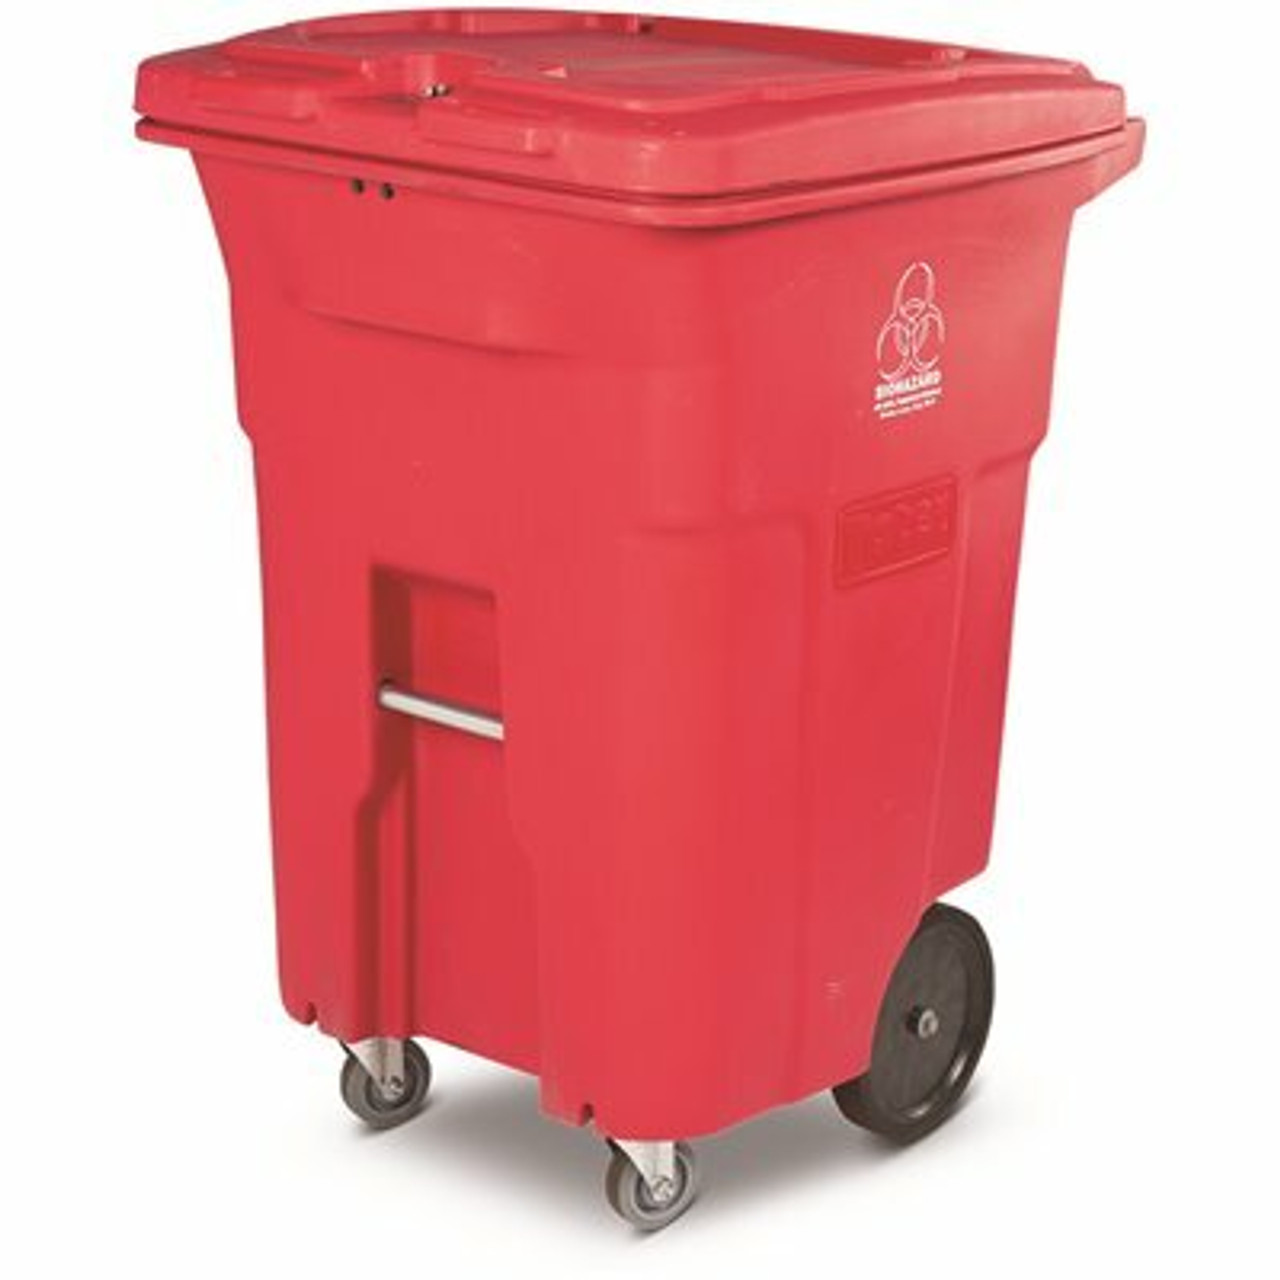 Toter 96 Gal. Red Hazardous Waste Trash Can With Wheels And Lid Lock (2 Caster Wheels 2 Stationary Wheels)